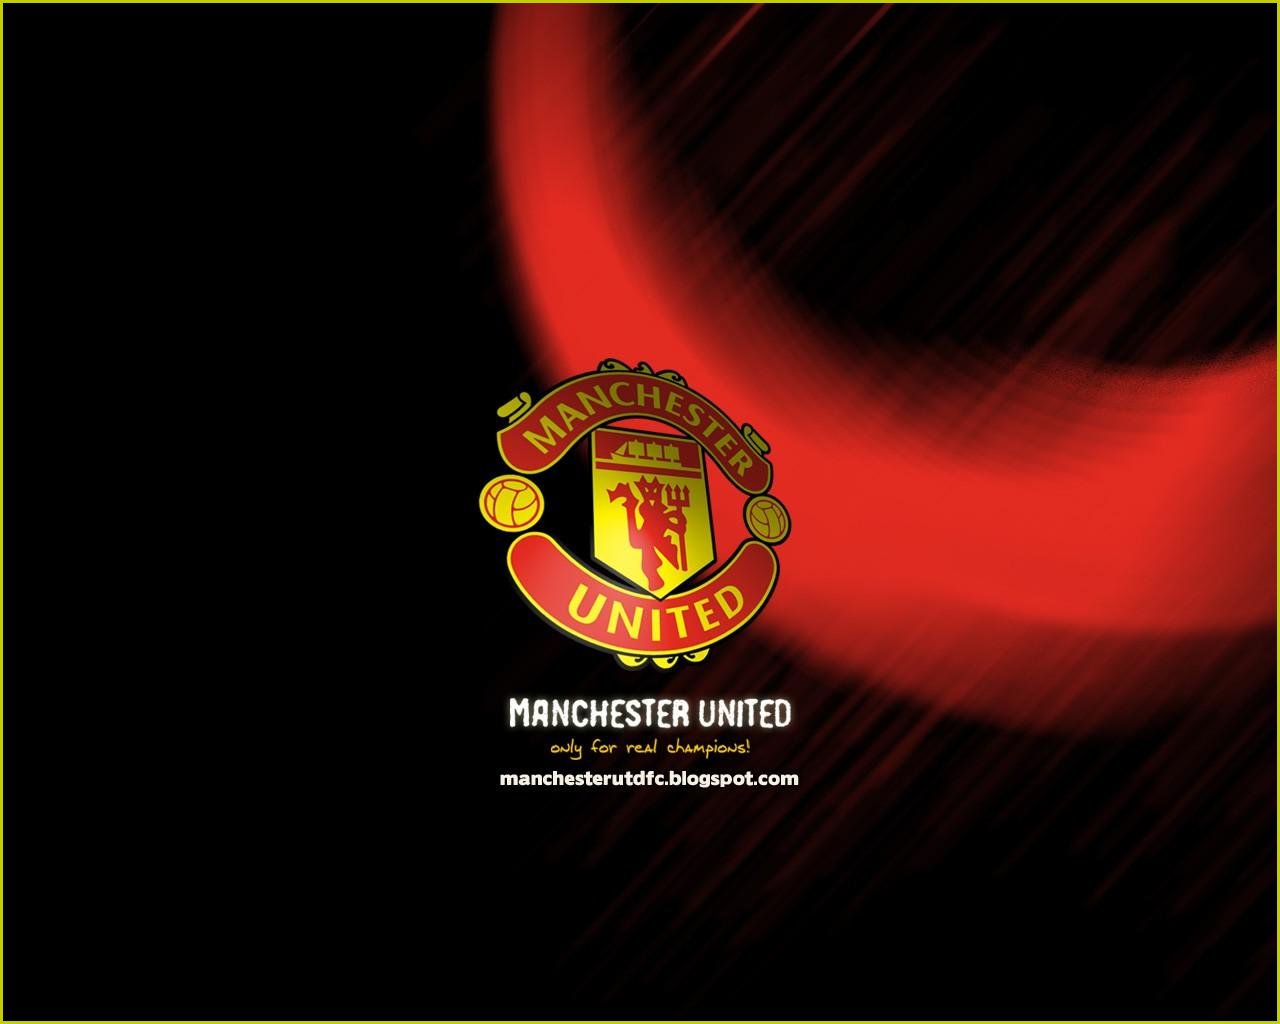 Manchester United Logo 26972 Hd Wallpapers in Football   Imagescicom